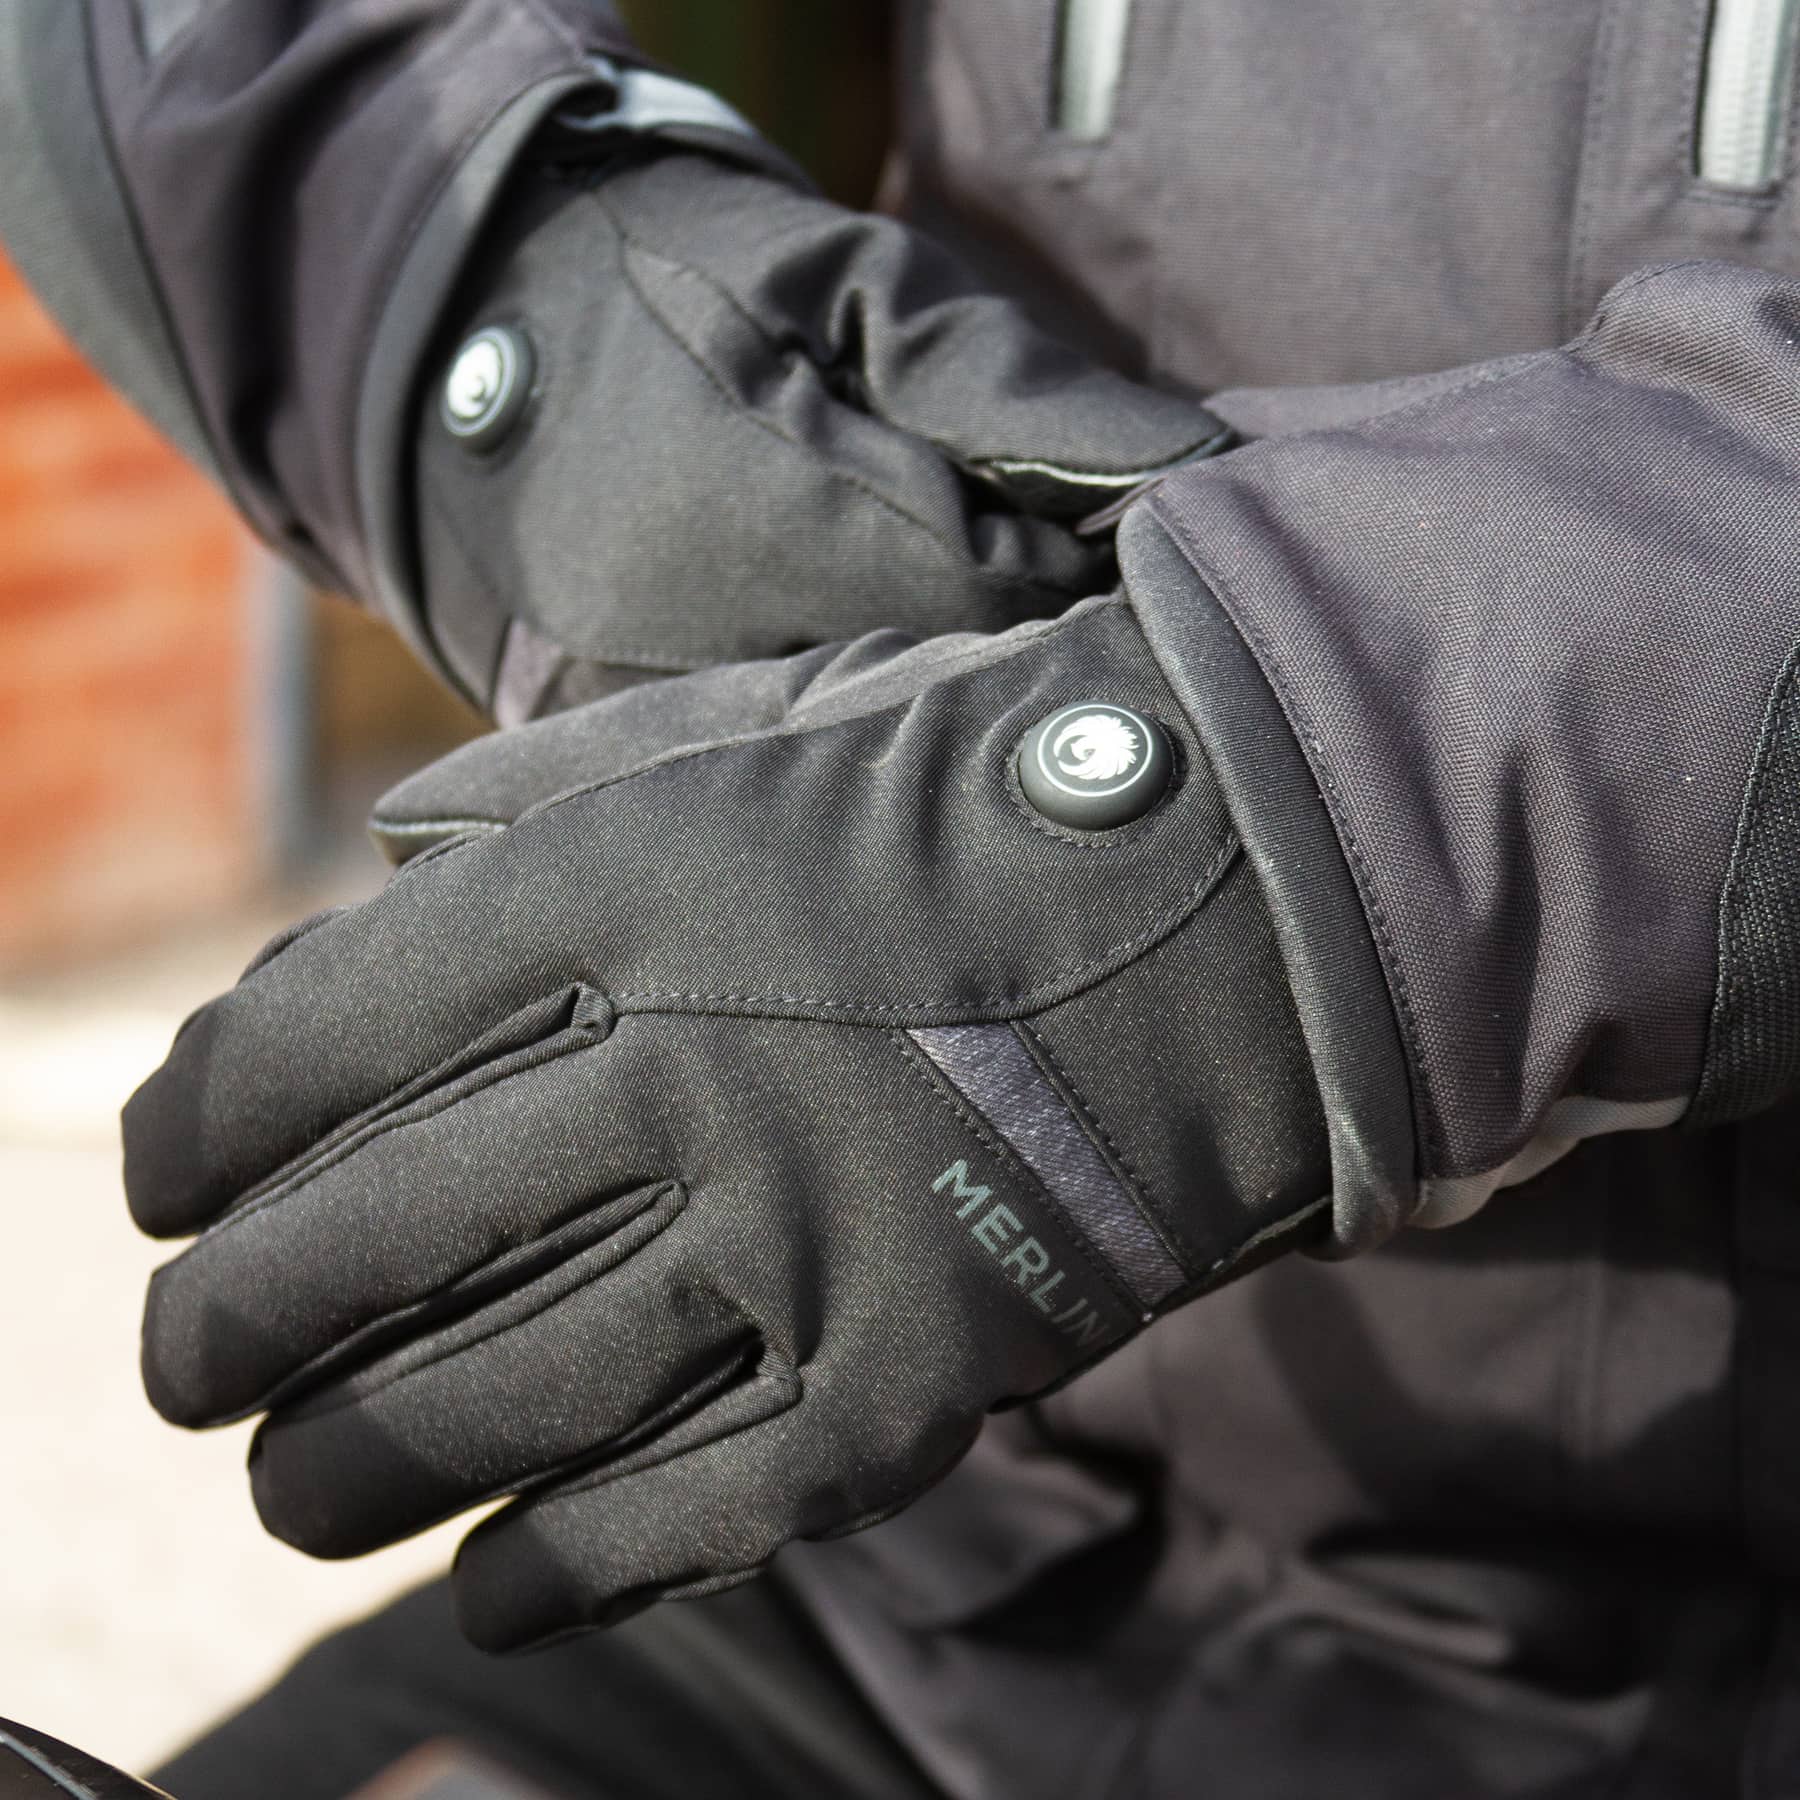 Lifestyle image of the Merlin Finchley heated gloves